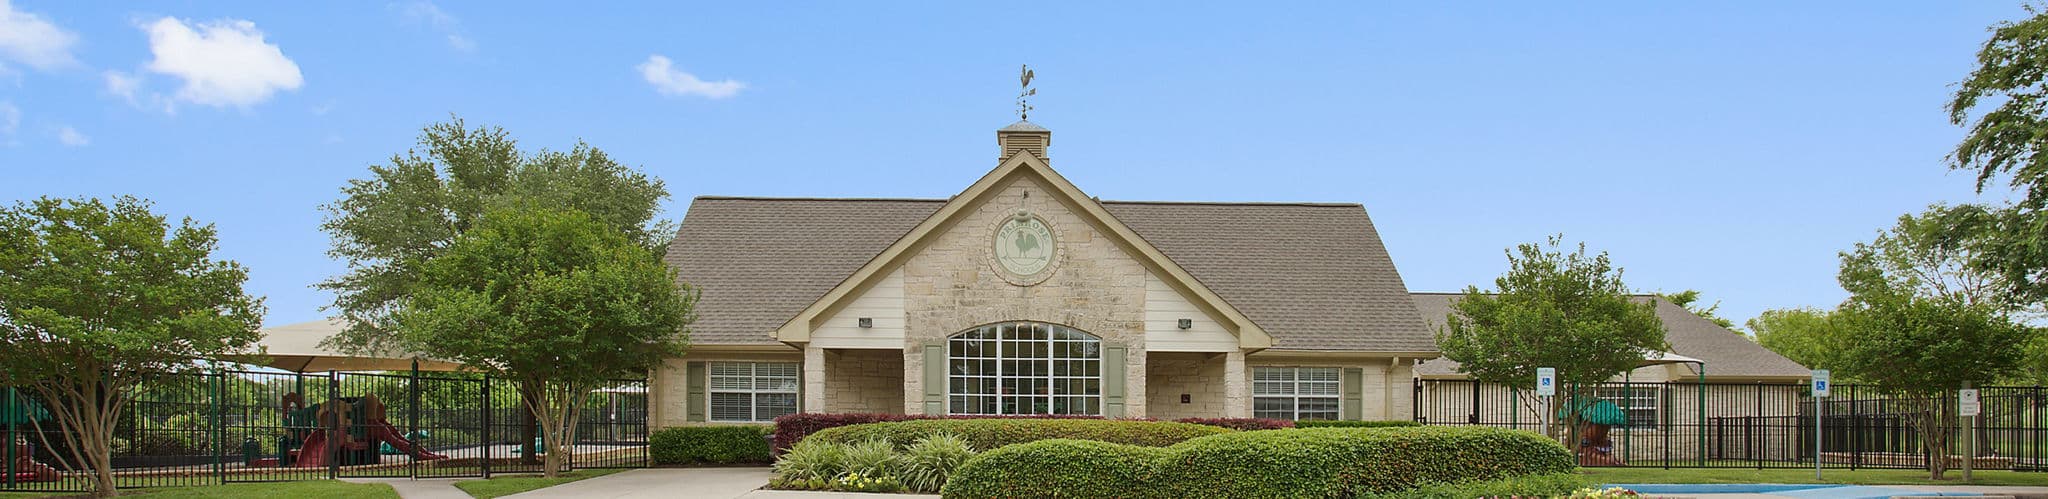 Exterior of a Primrose School of Round Rock at Forest Creek